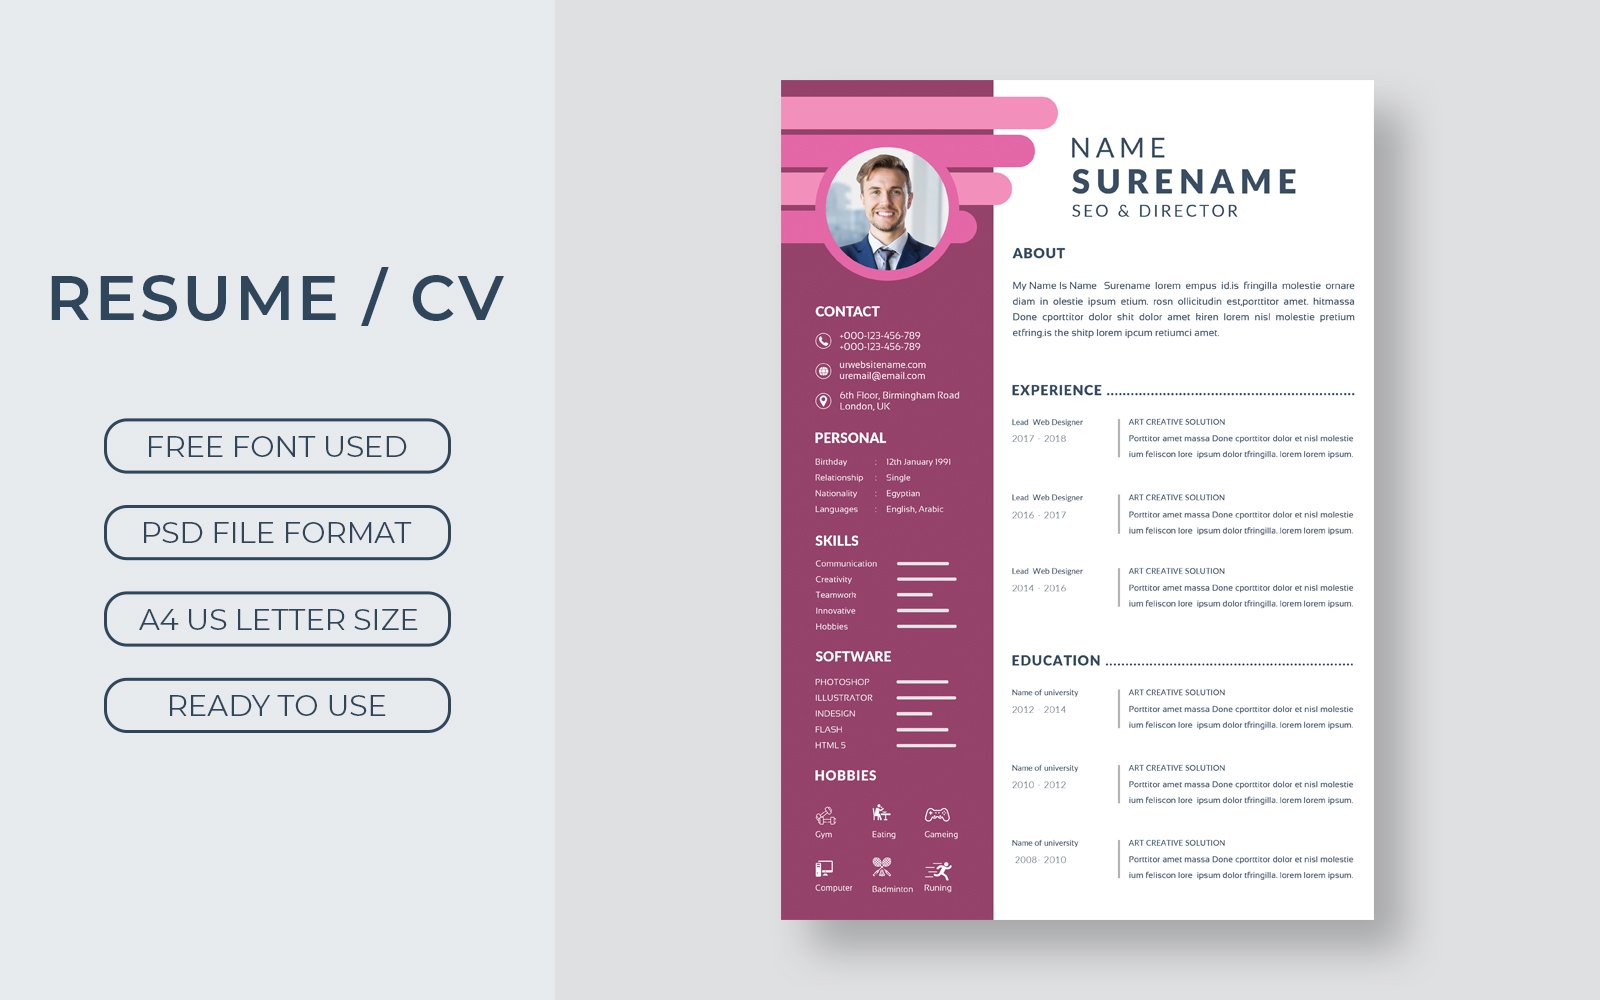 Template #281788 Resume A4 Webdesign Template - Logo template Preview